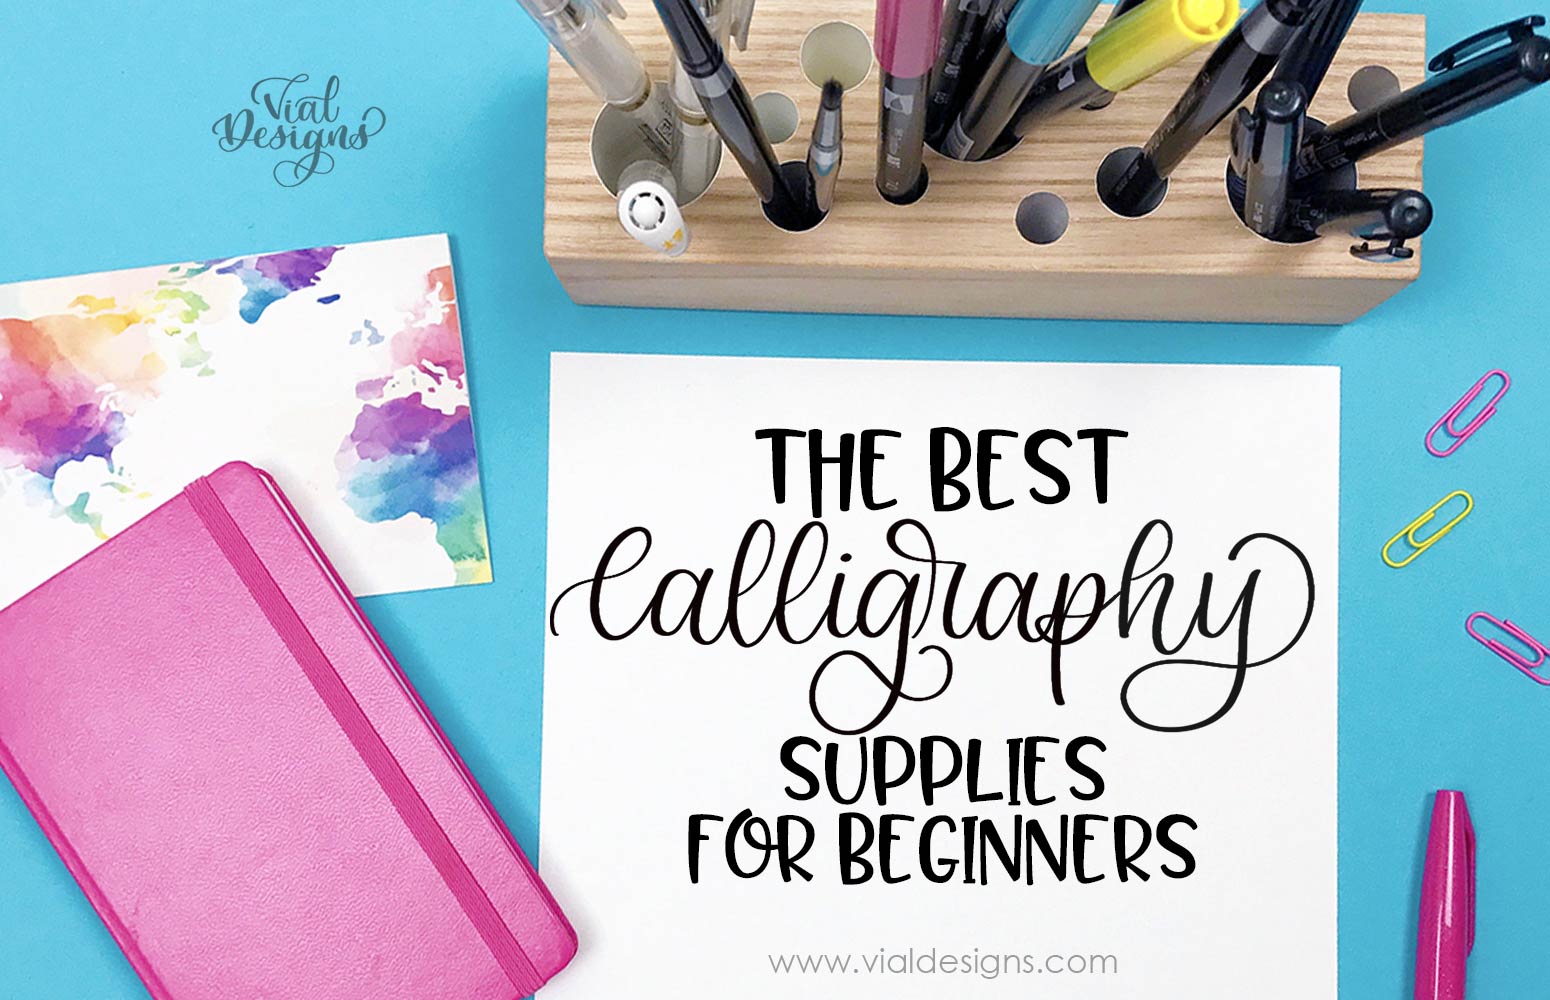 https://www.vialdesigns.com/wp-content/uploads/Calligraphy-supplies-for-beginners-by-Vial-Designs.jpg